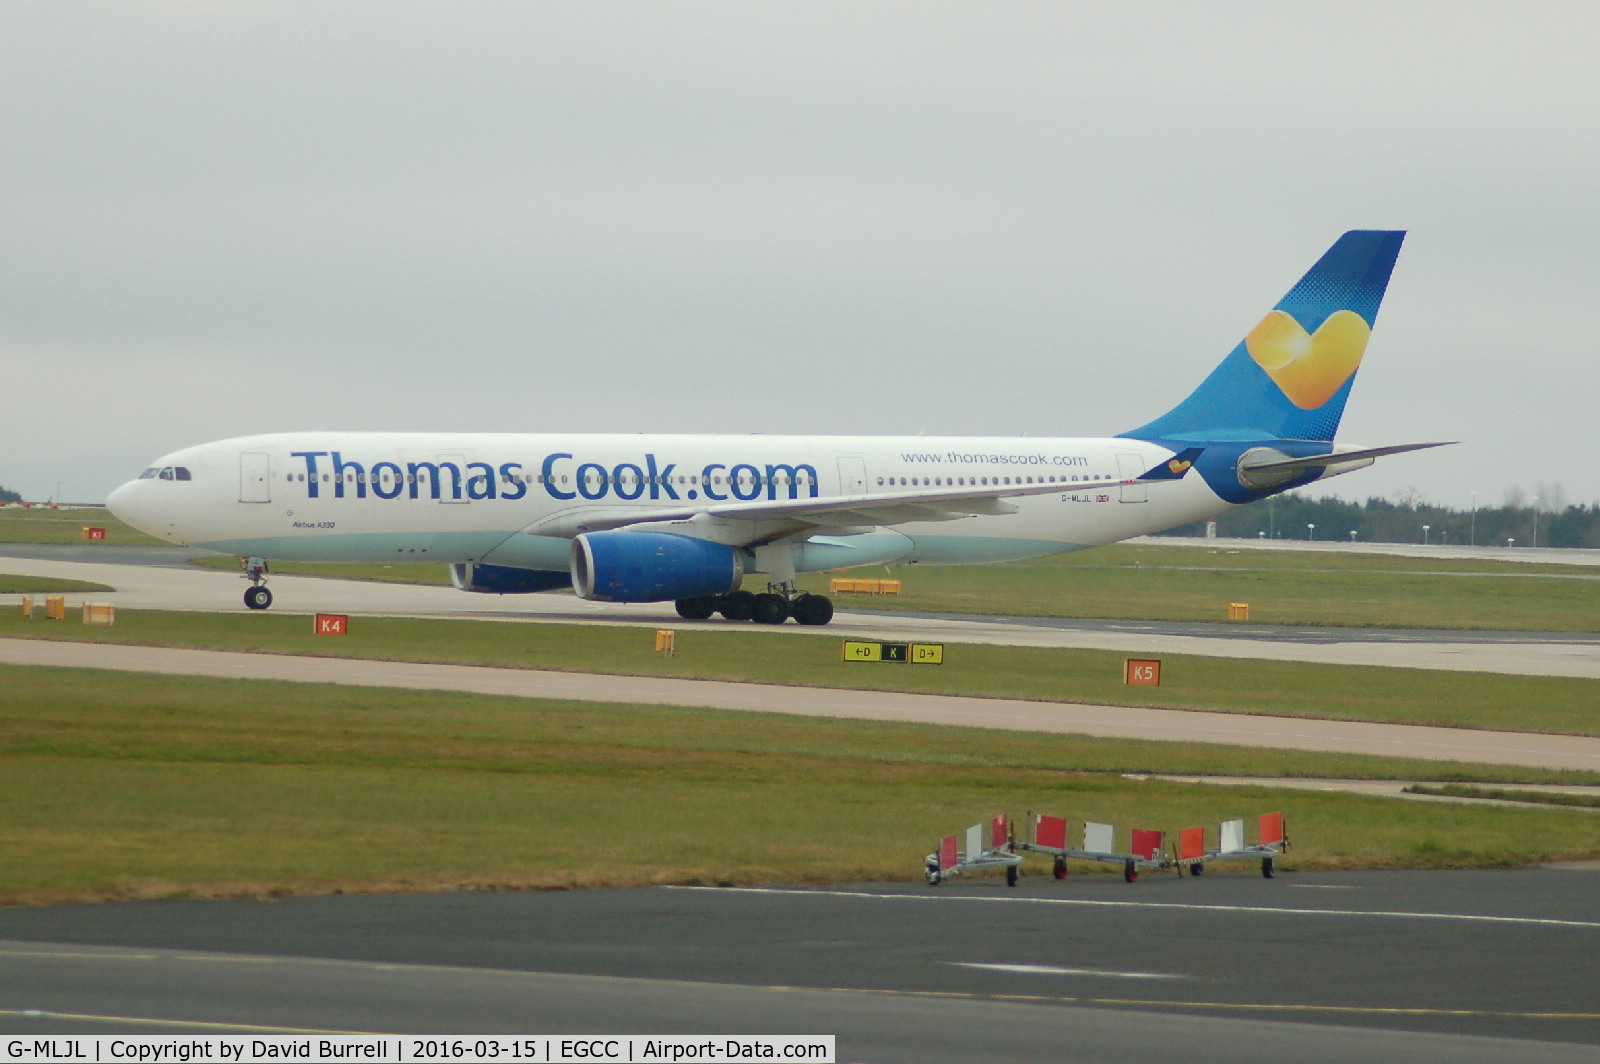 G-MLJL, 1999 Airbus A330-243 C/N 254, Thomas Cook Airbus A330-243 G-MLJL Manchester Airport.